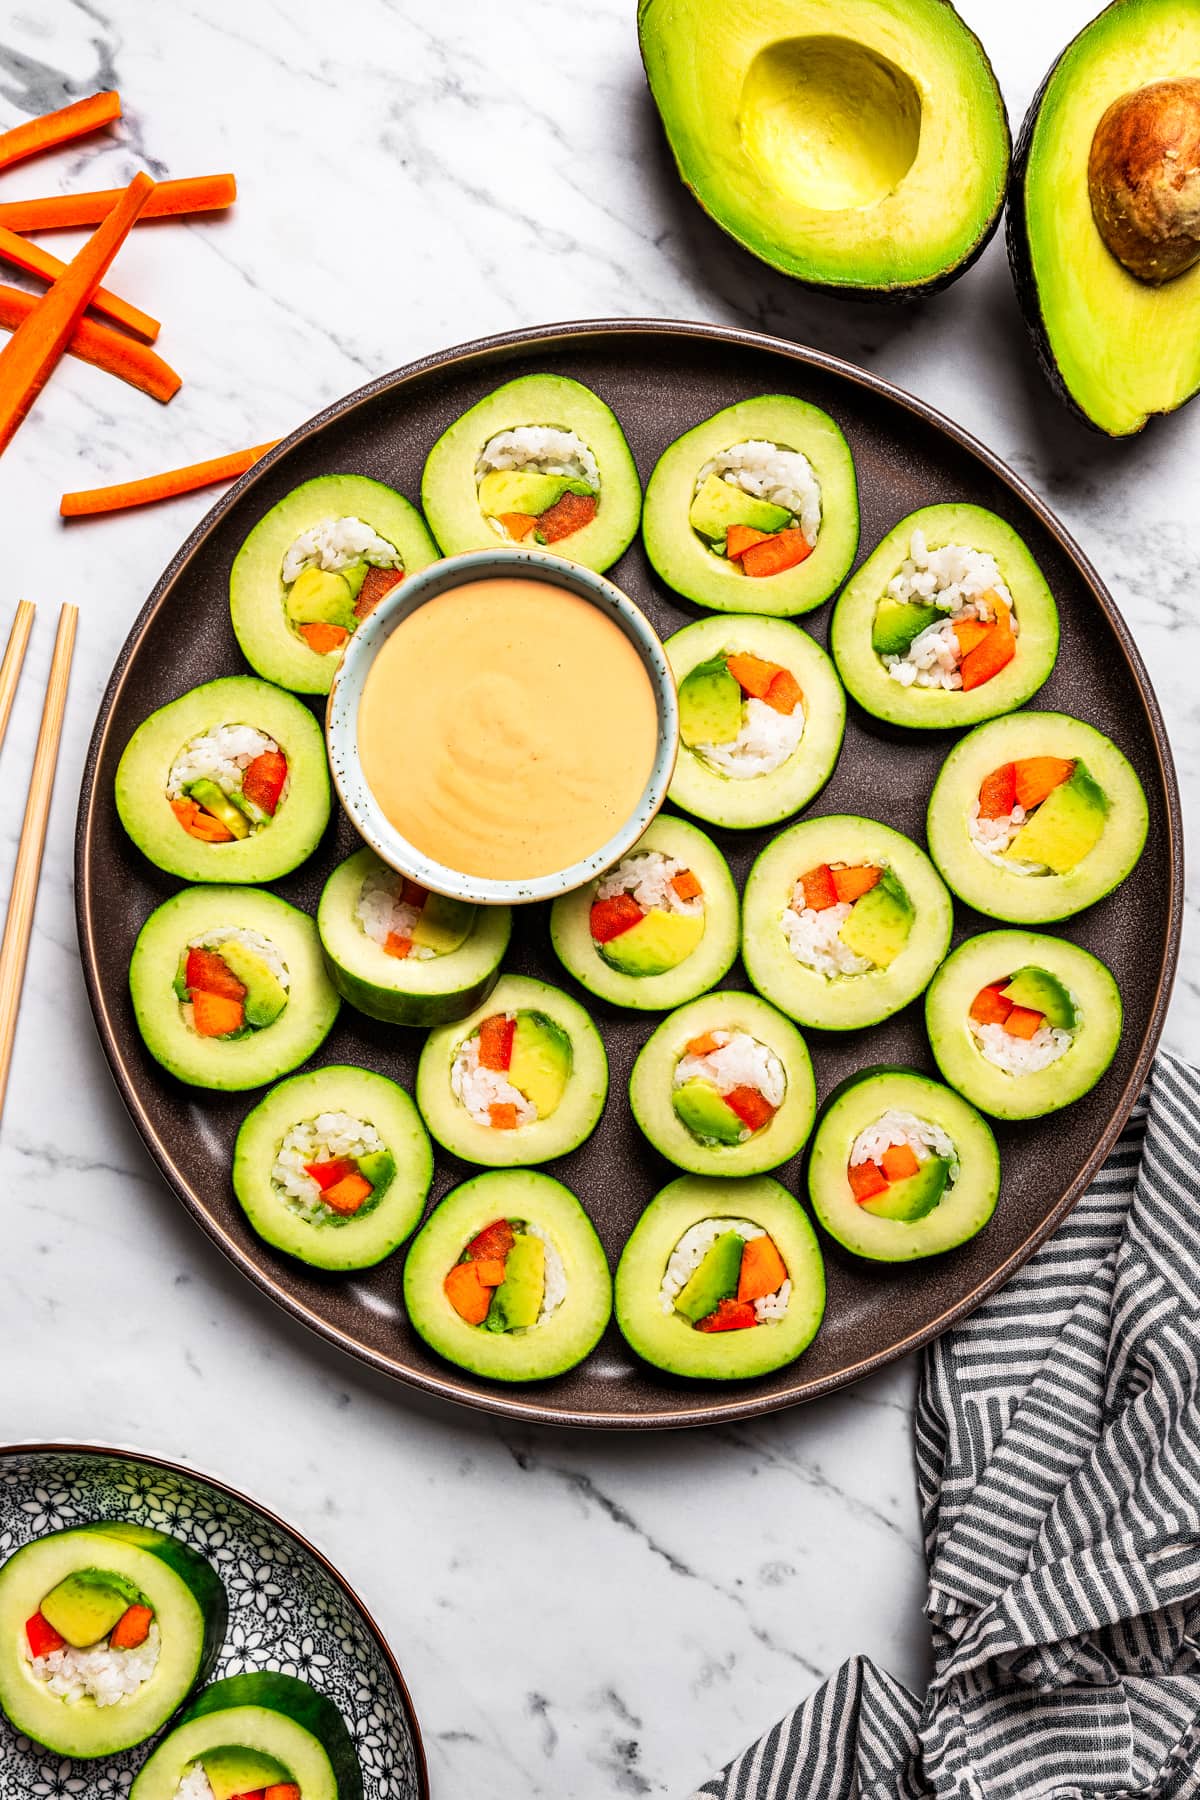 A platter loaded with sliced cucumber rolls and sriracha dipping sauce.